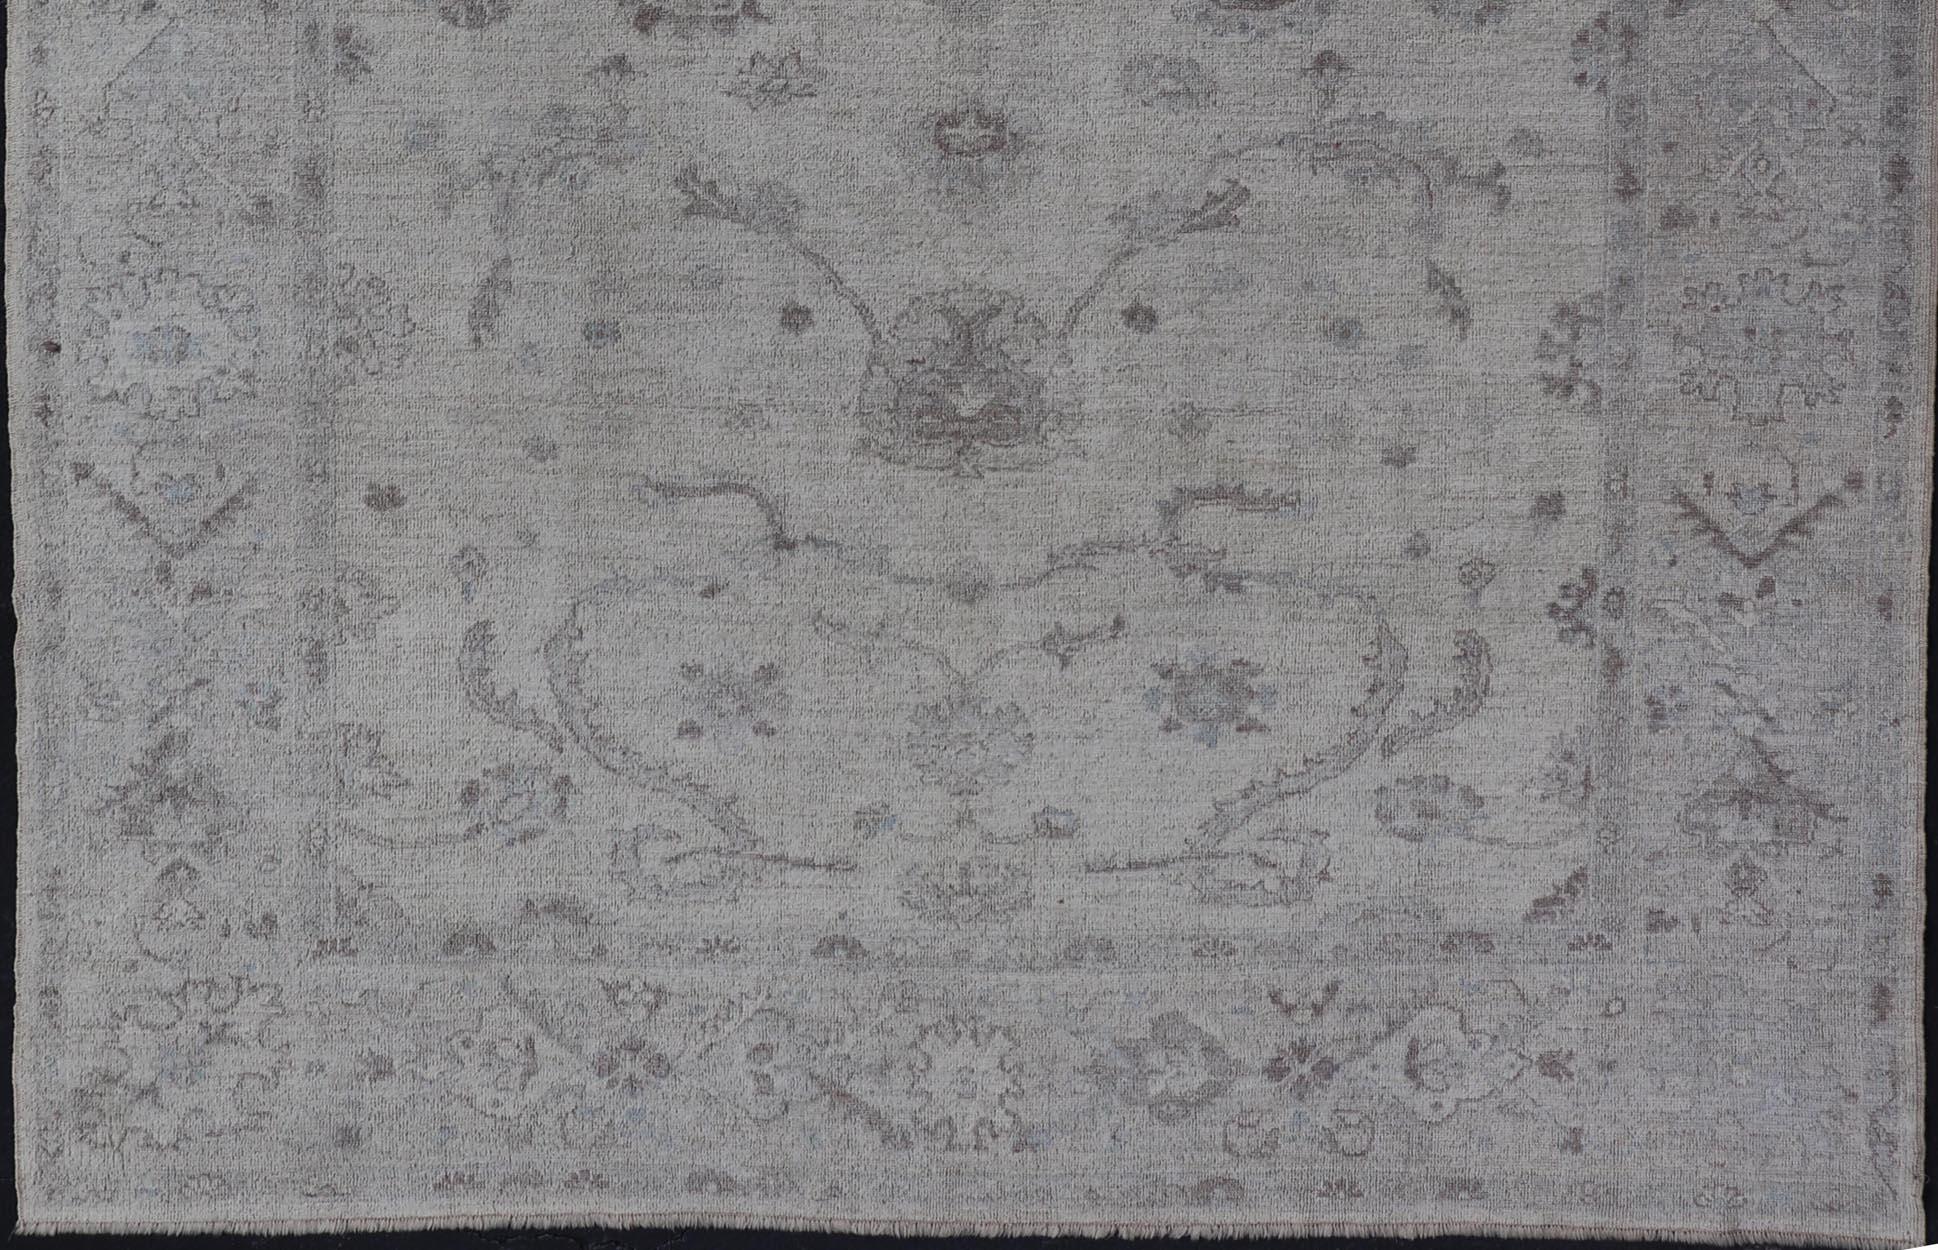 Angora Oushak Turkish Rug in Cream, Taupe, Silver, Light Brown Light Blue Colors In Excellent Condition For Sale In Atlanta, GA